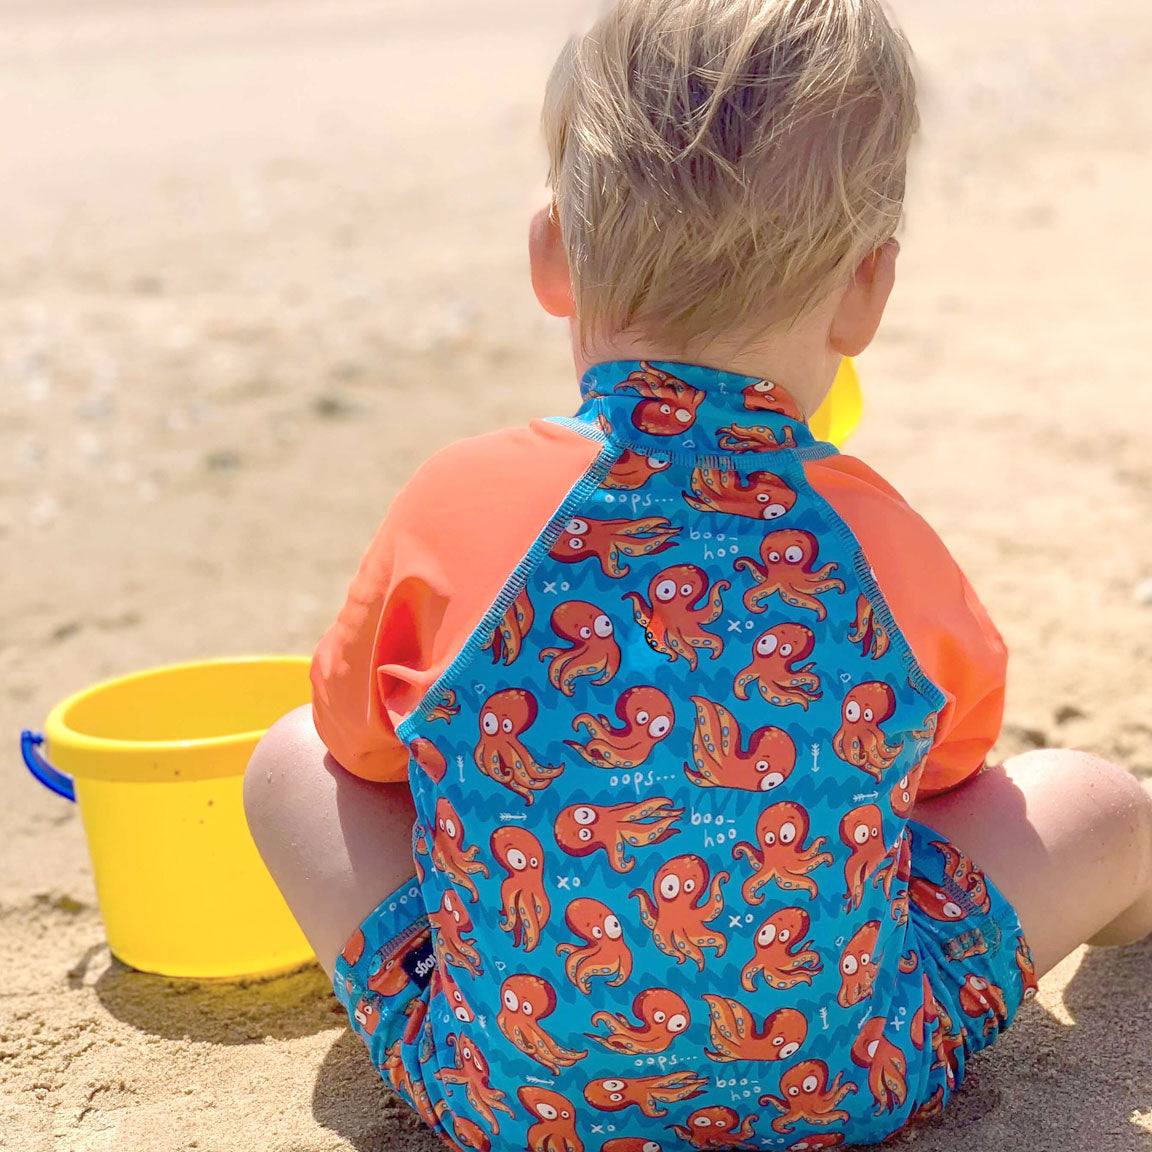 One-piece Sunsuit - ‘O’ is for Octopus